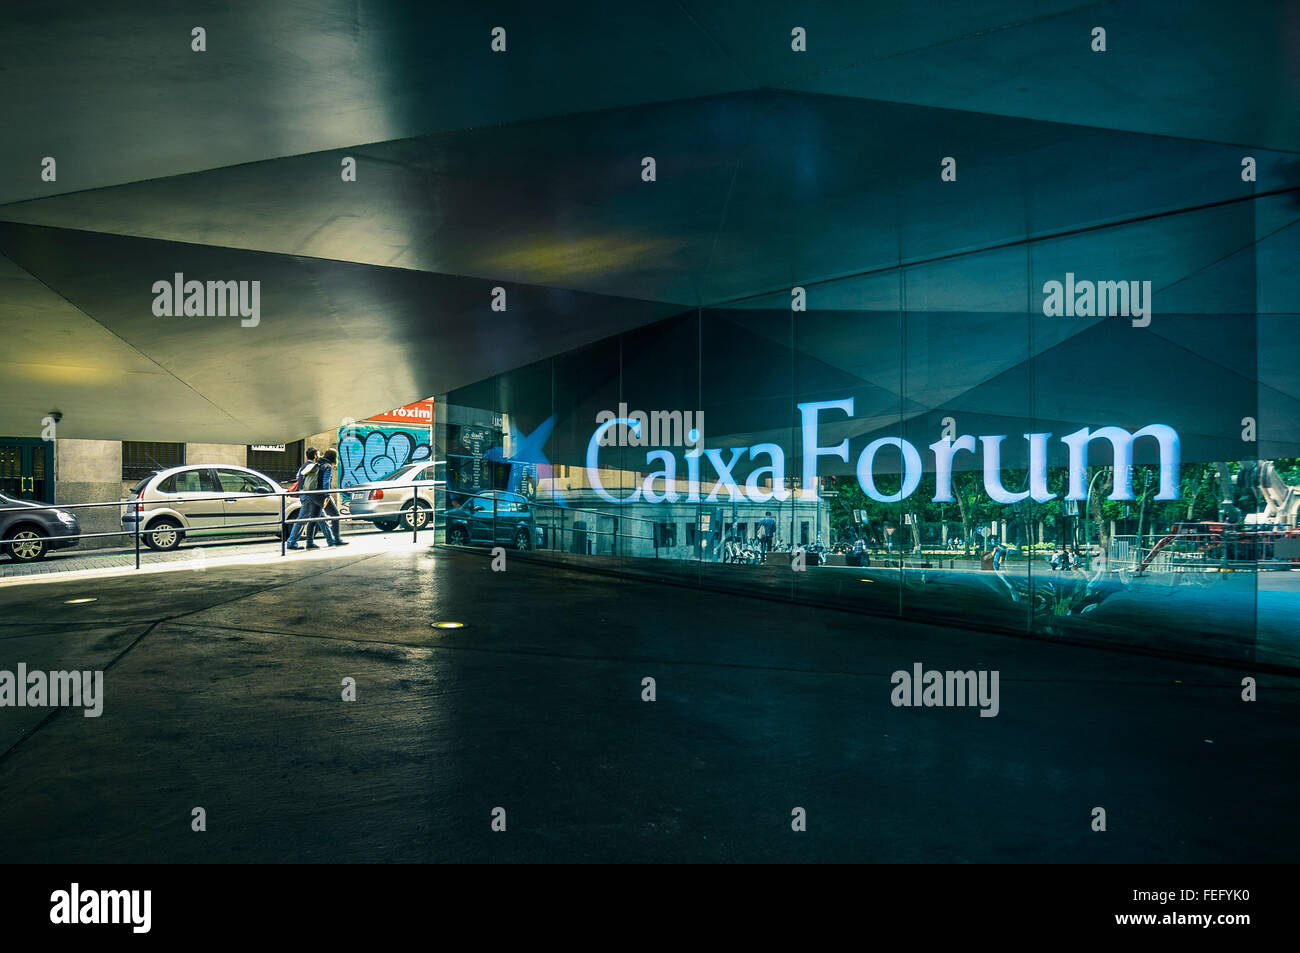 Entrance to the Caixa Forum Gallery and exhibition centre, Madrid, Spain Stock Photo